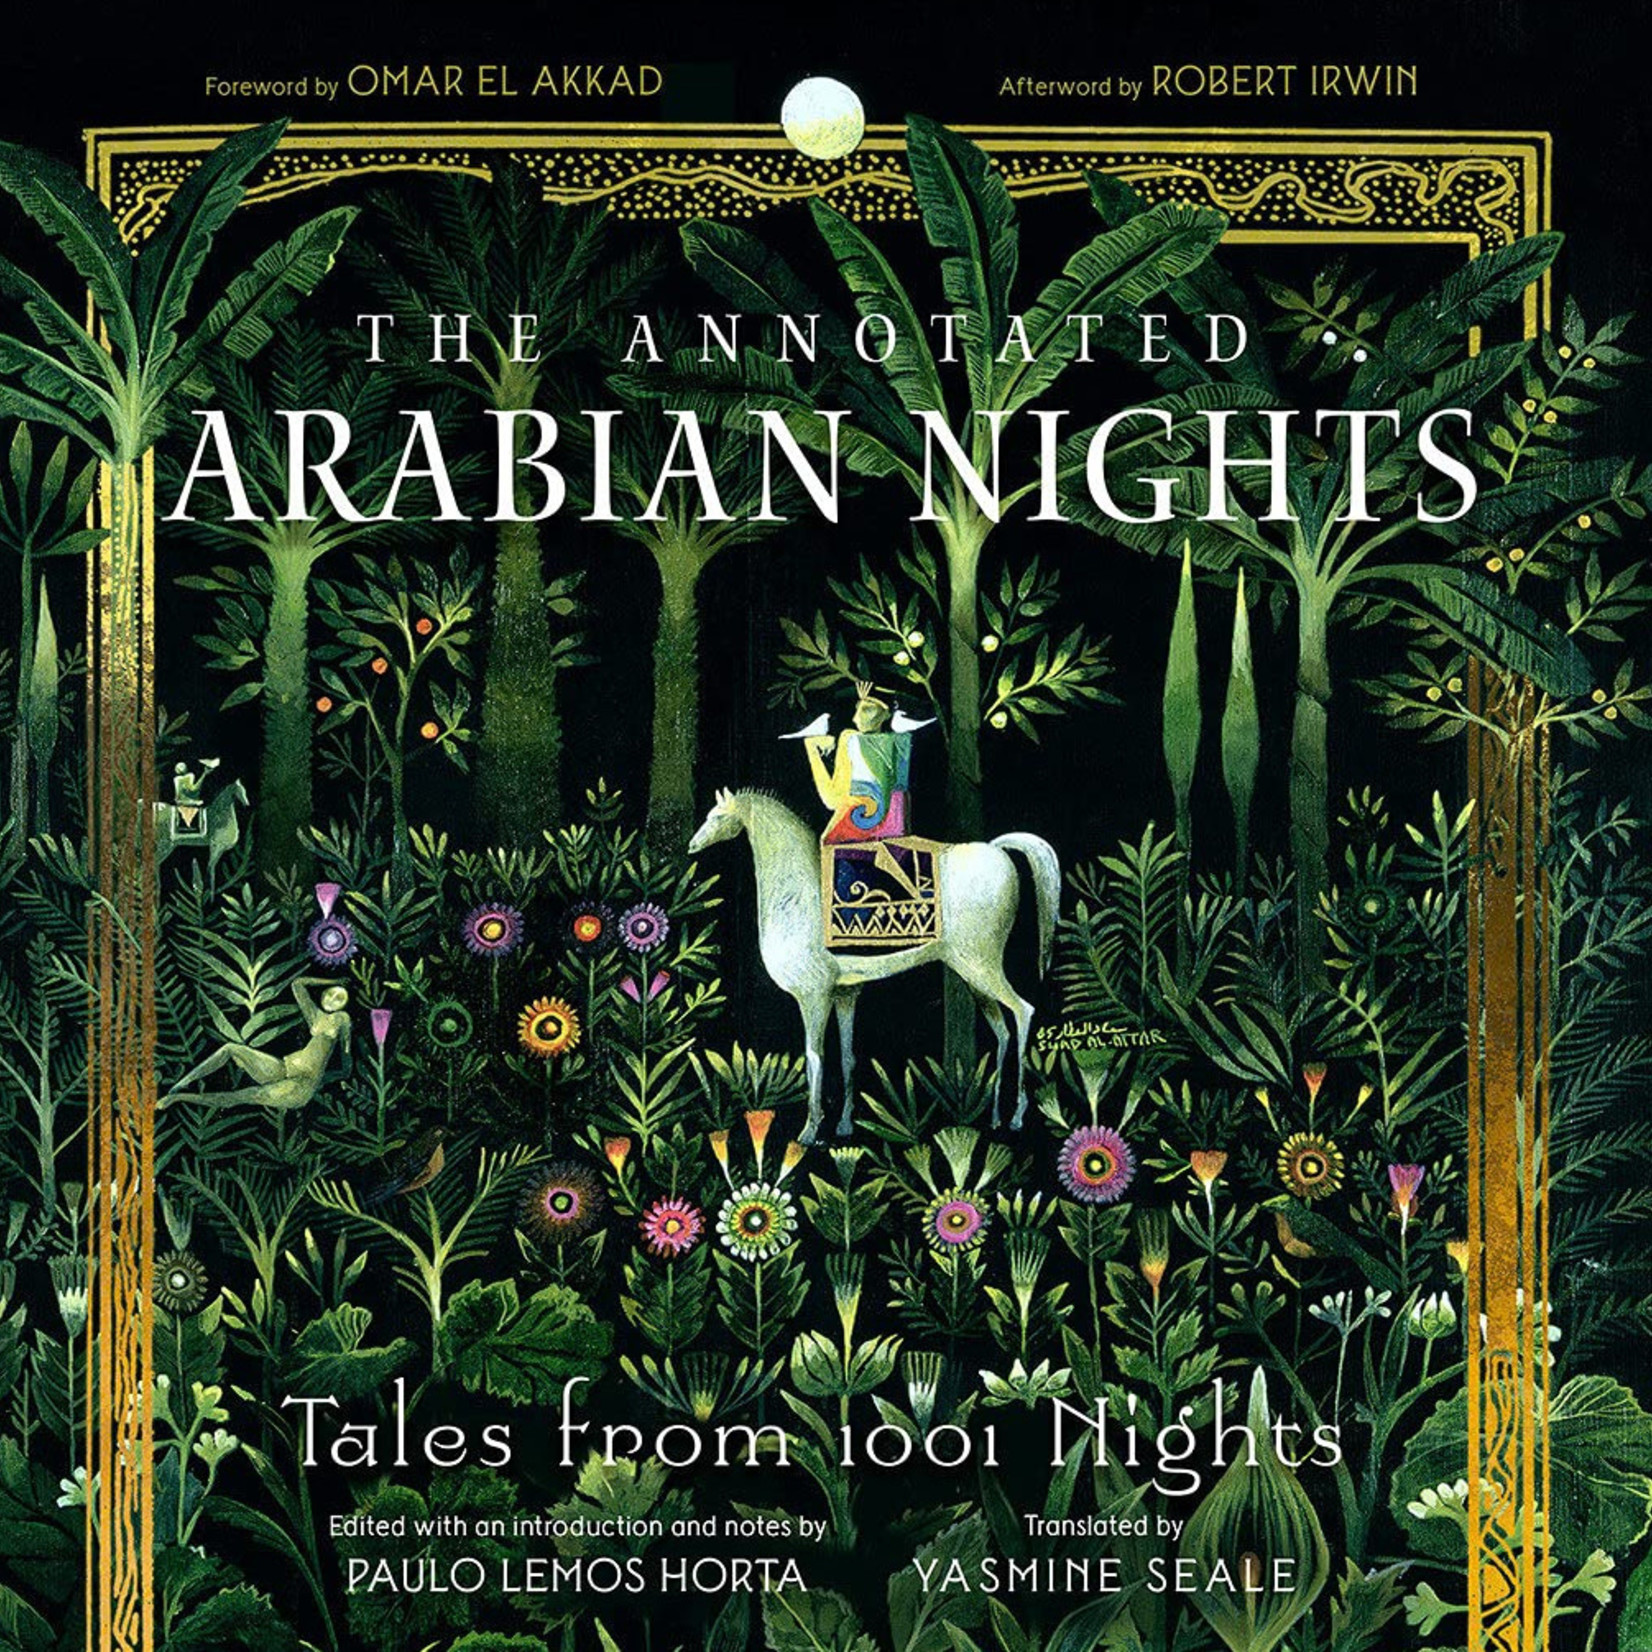 THE ANNOTATED ARABIAN NIGHTS